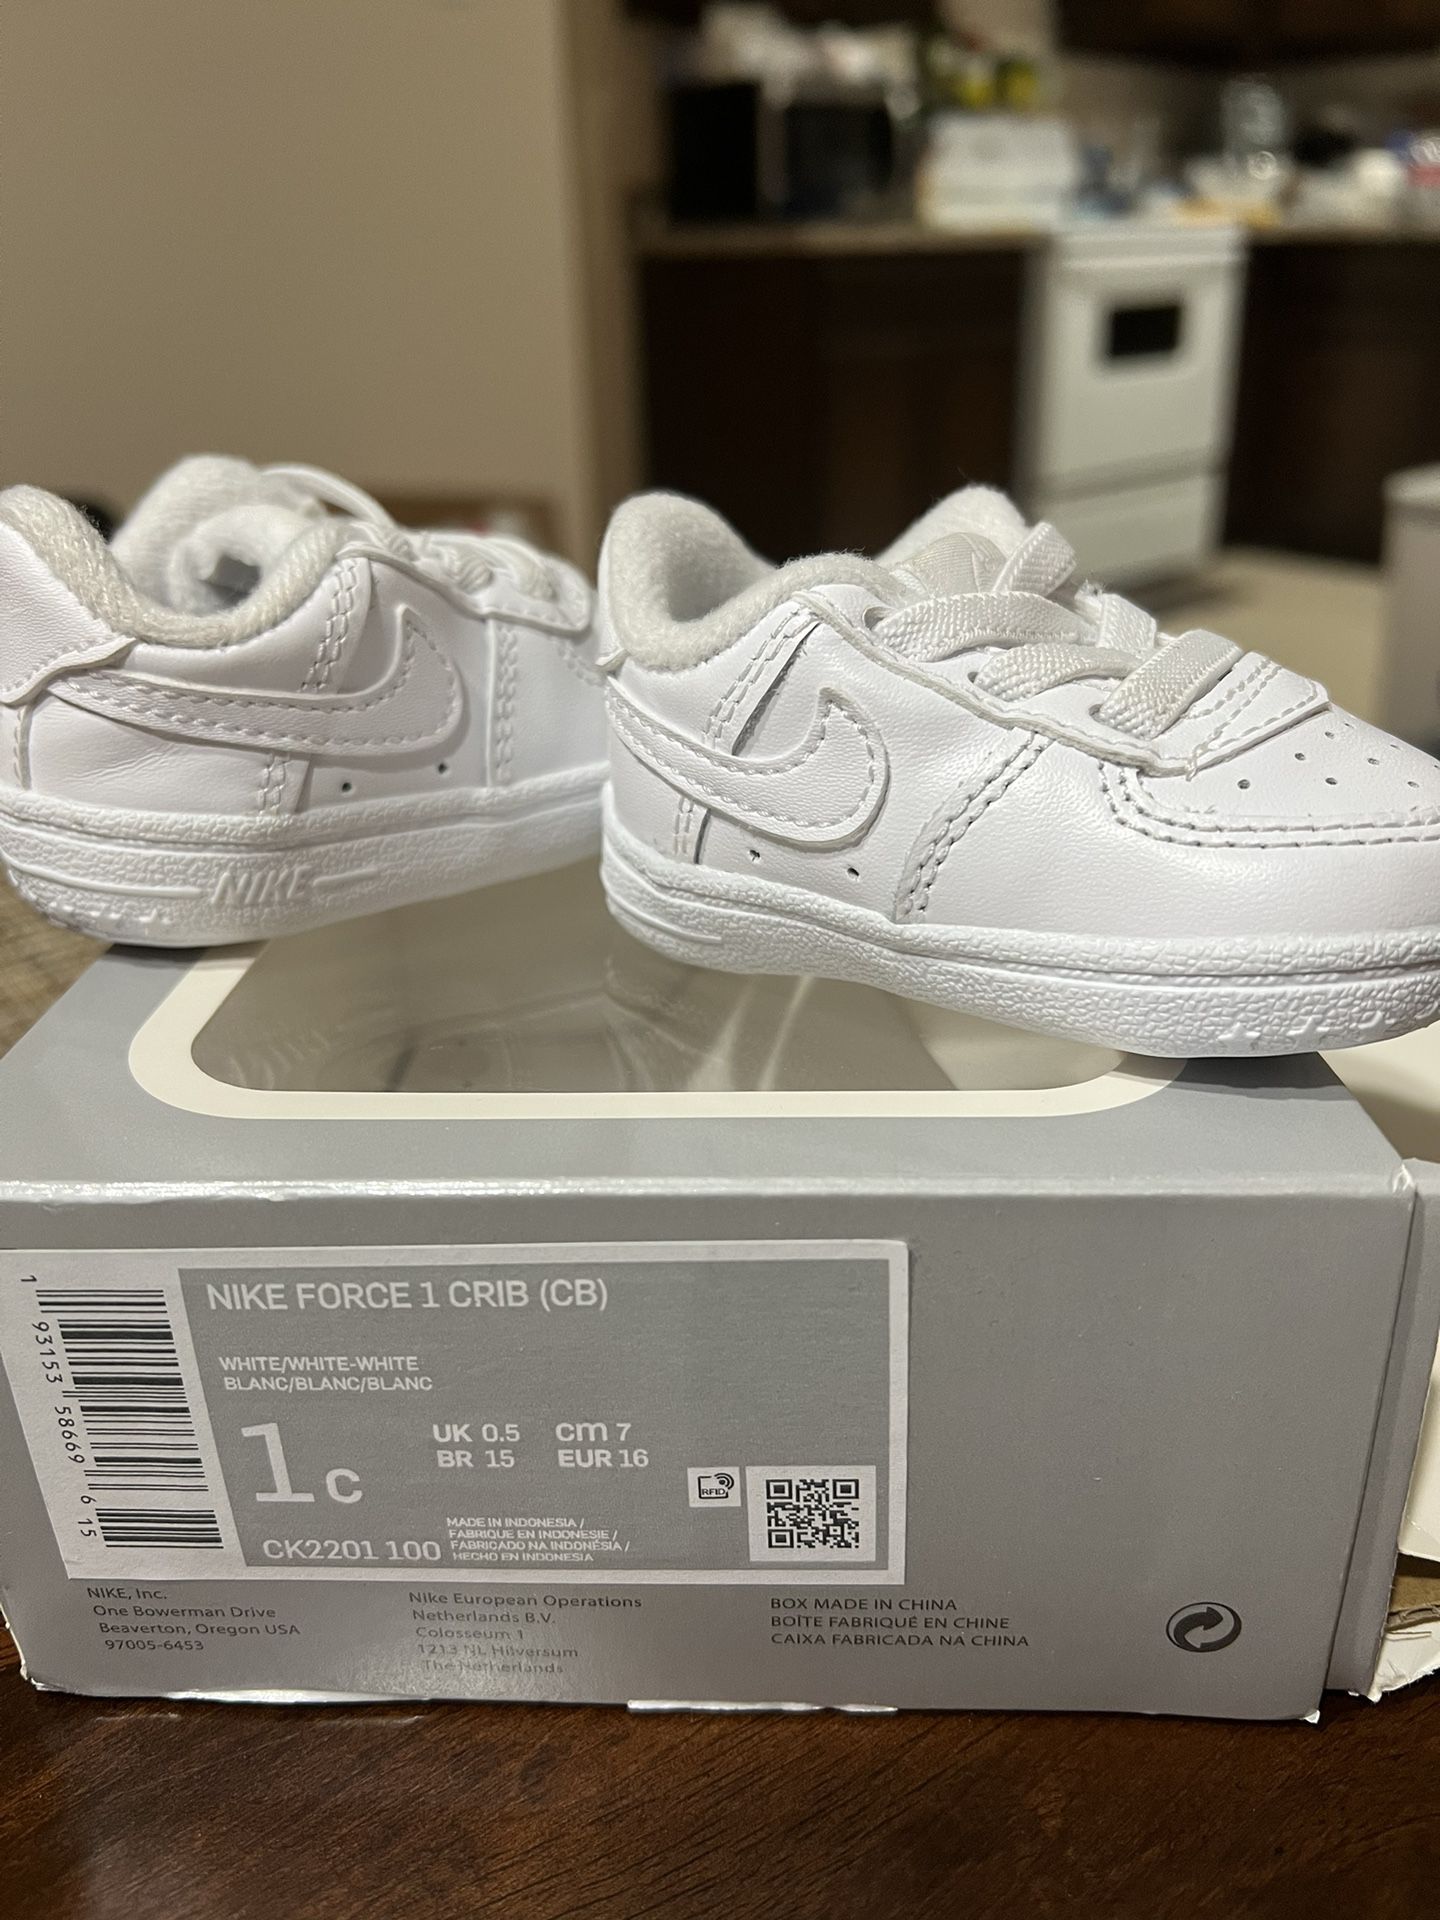 Roei uit timmerman ritme Nike Force 1 Crib white shoes for Sale in Harlingen, TX - OfferUp